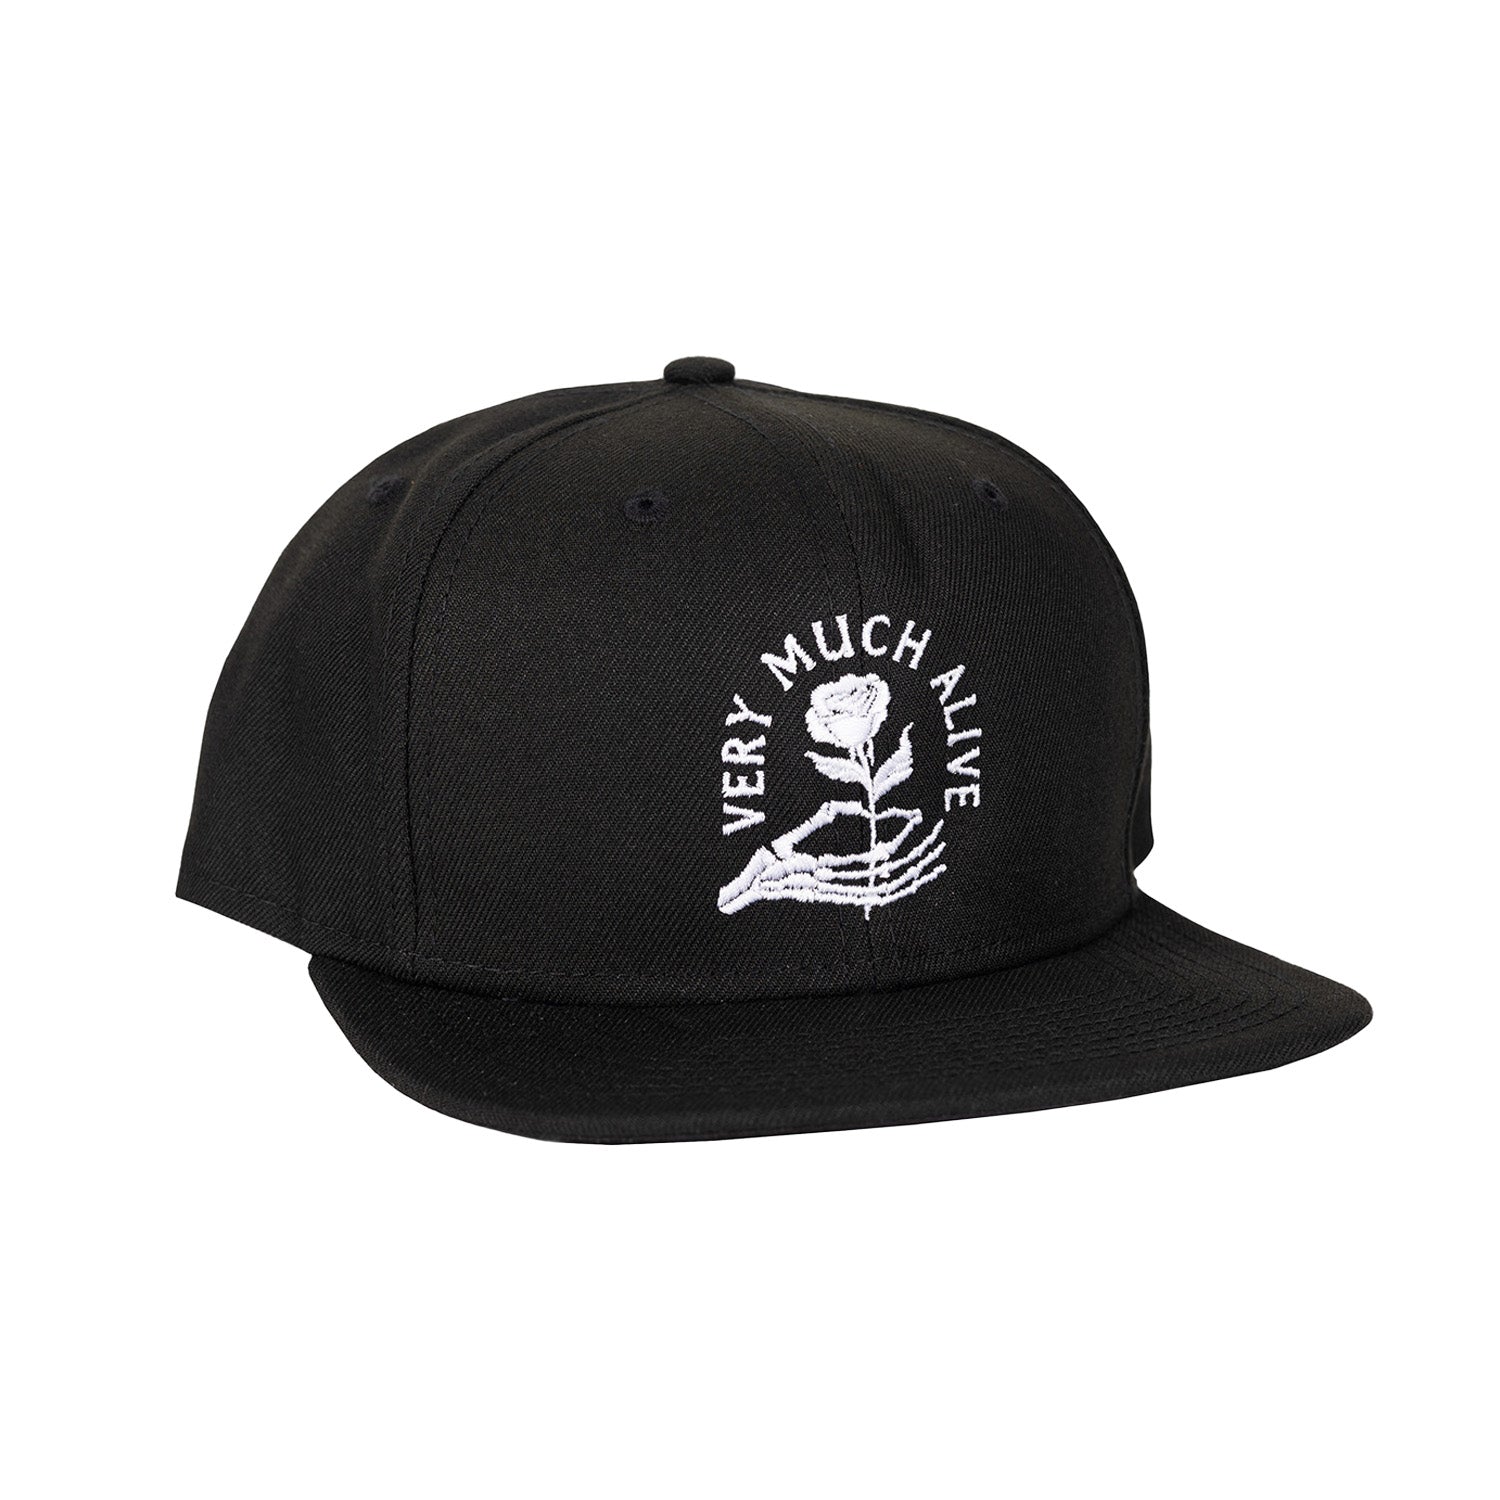 Emo’s Not Dead, Band Merch, Very Much Alive Snapback, hat